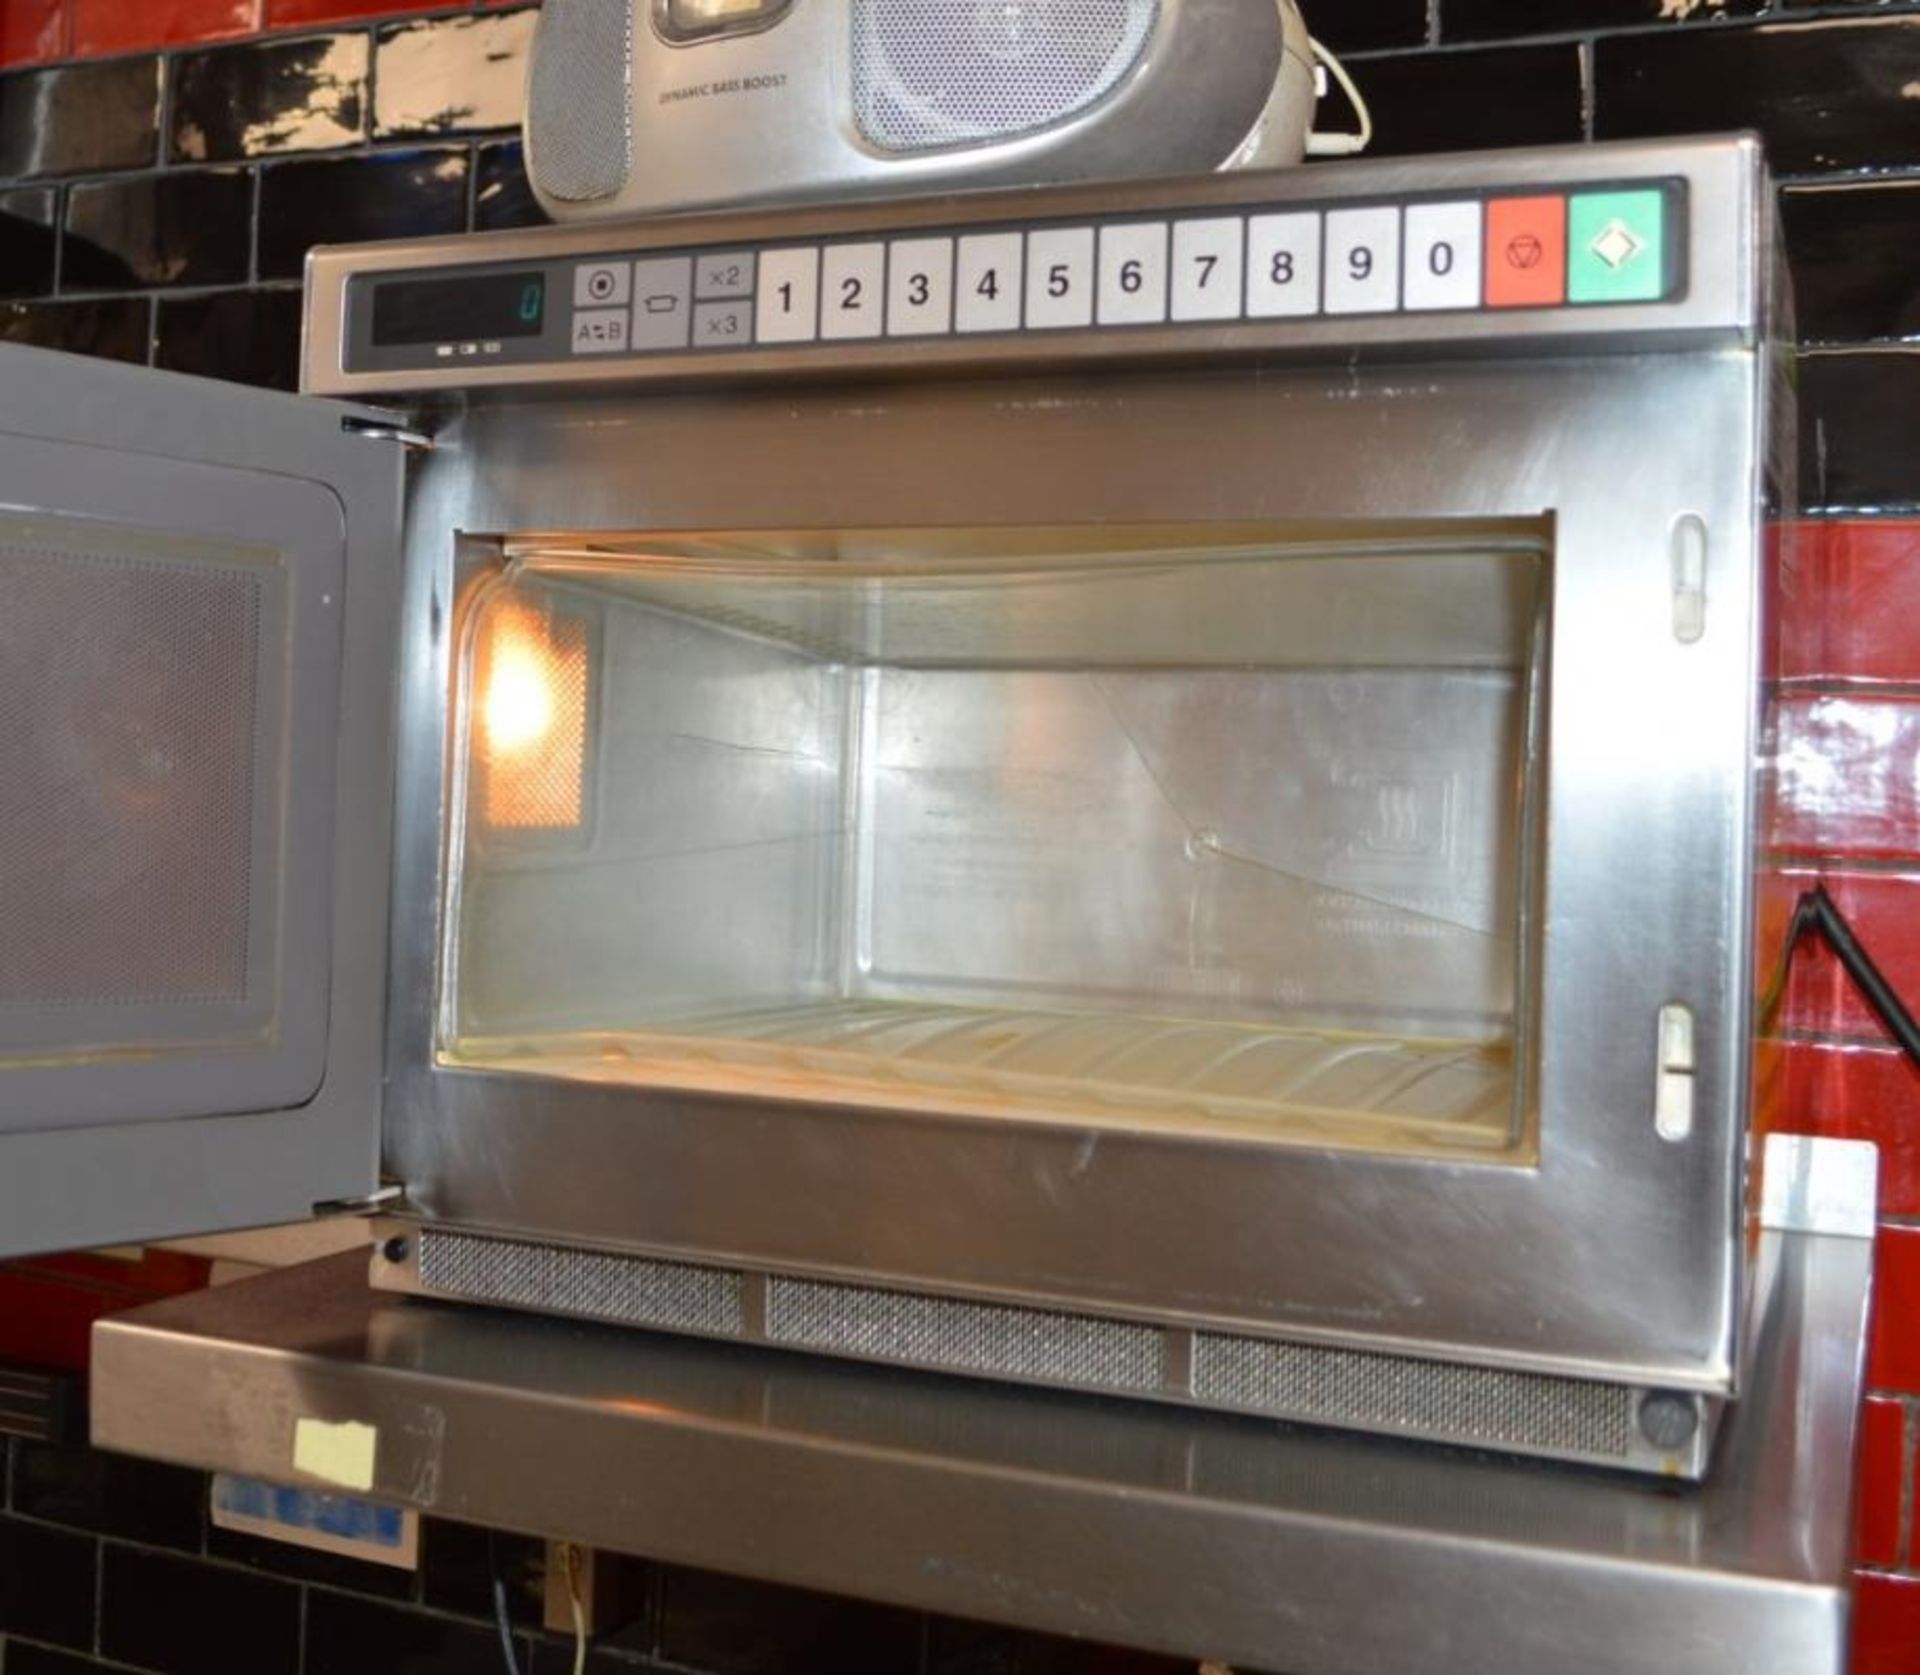 1 x Panasonic Commercial Microwave Oven With Stainless Steel Exterior and Wall Mounted Shelf - Ref - Image 2 of 3